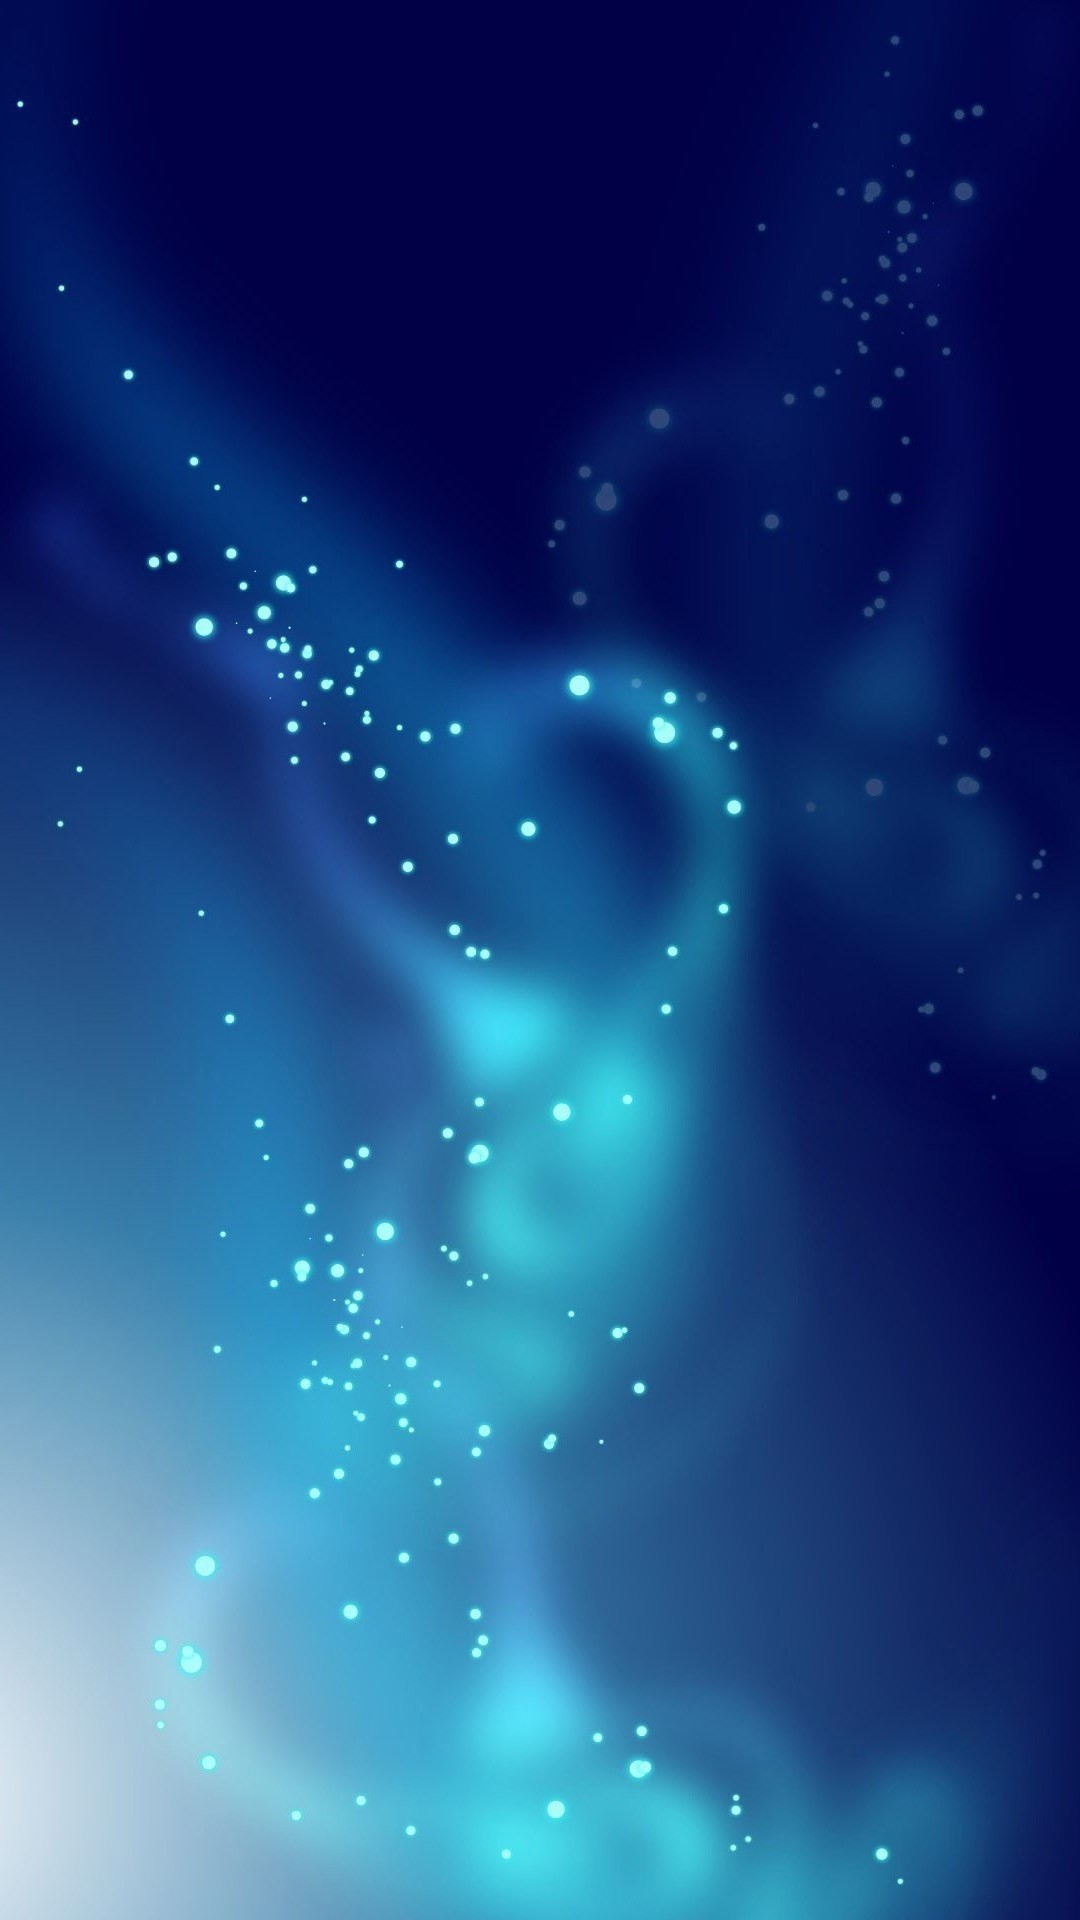 1080x1920 sparkling-blue-smoke-abstract-mobile-wallpaper--4350-